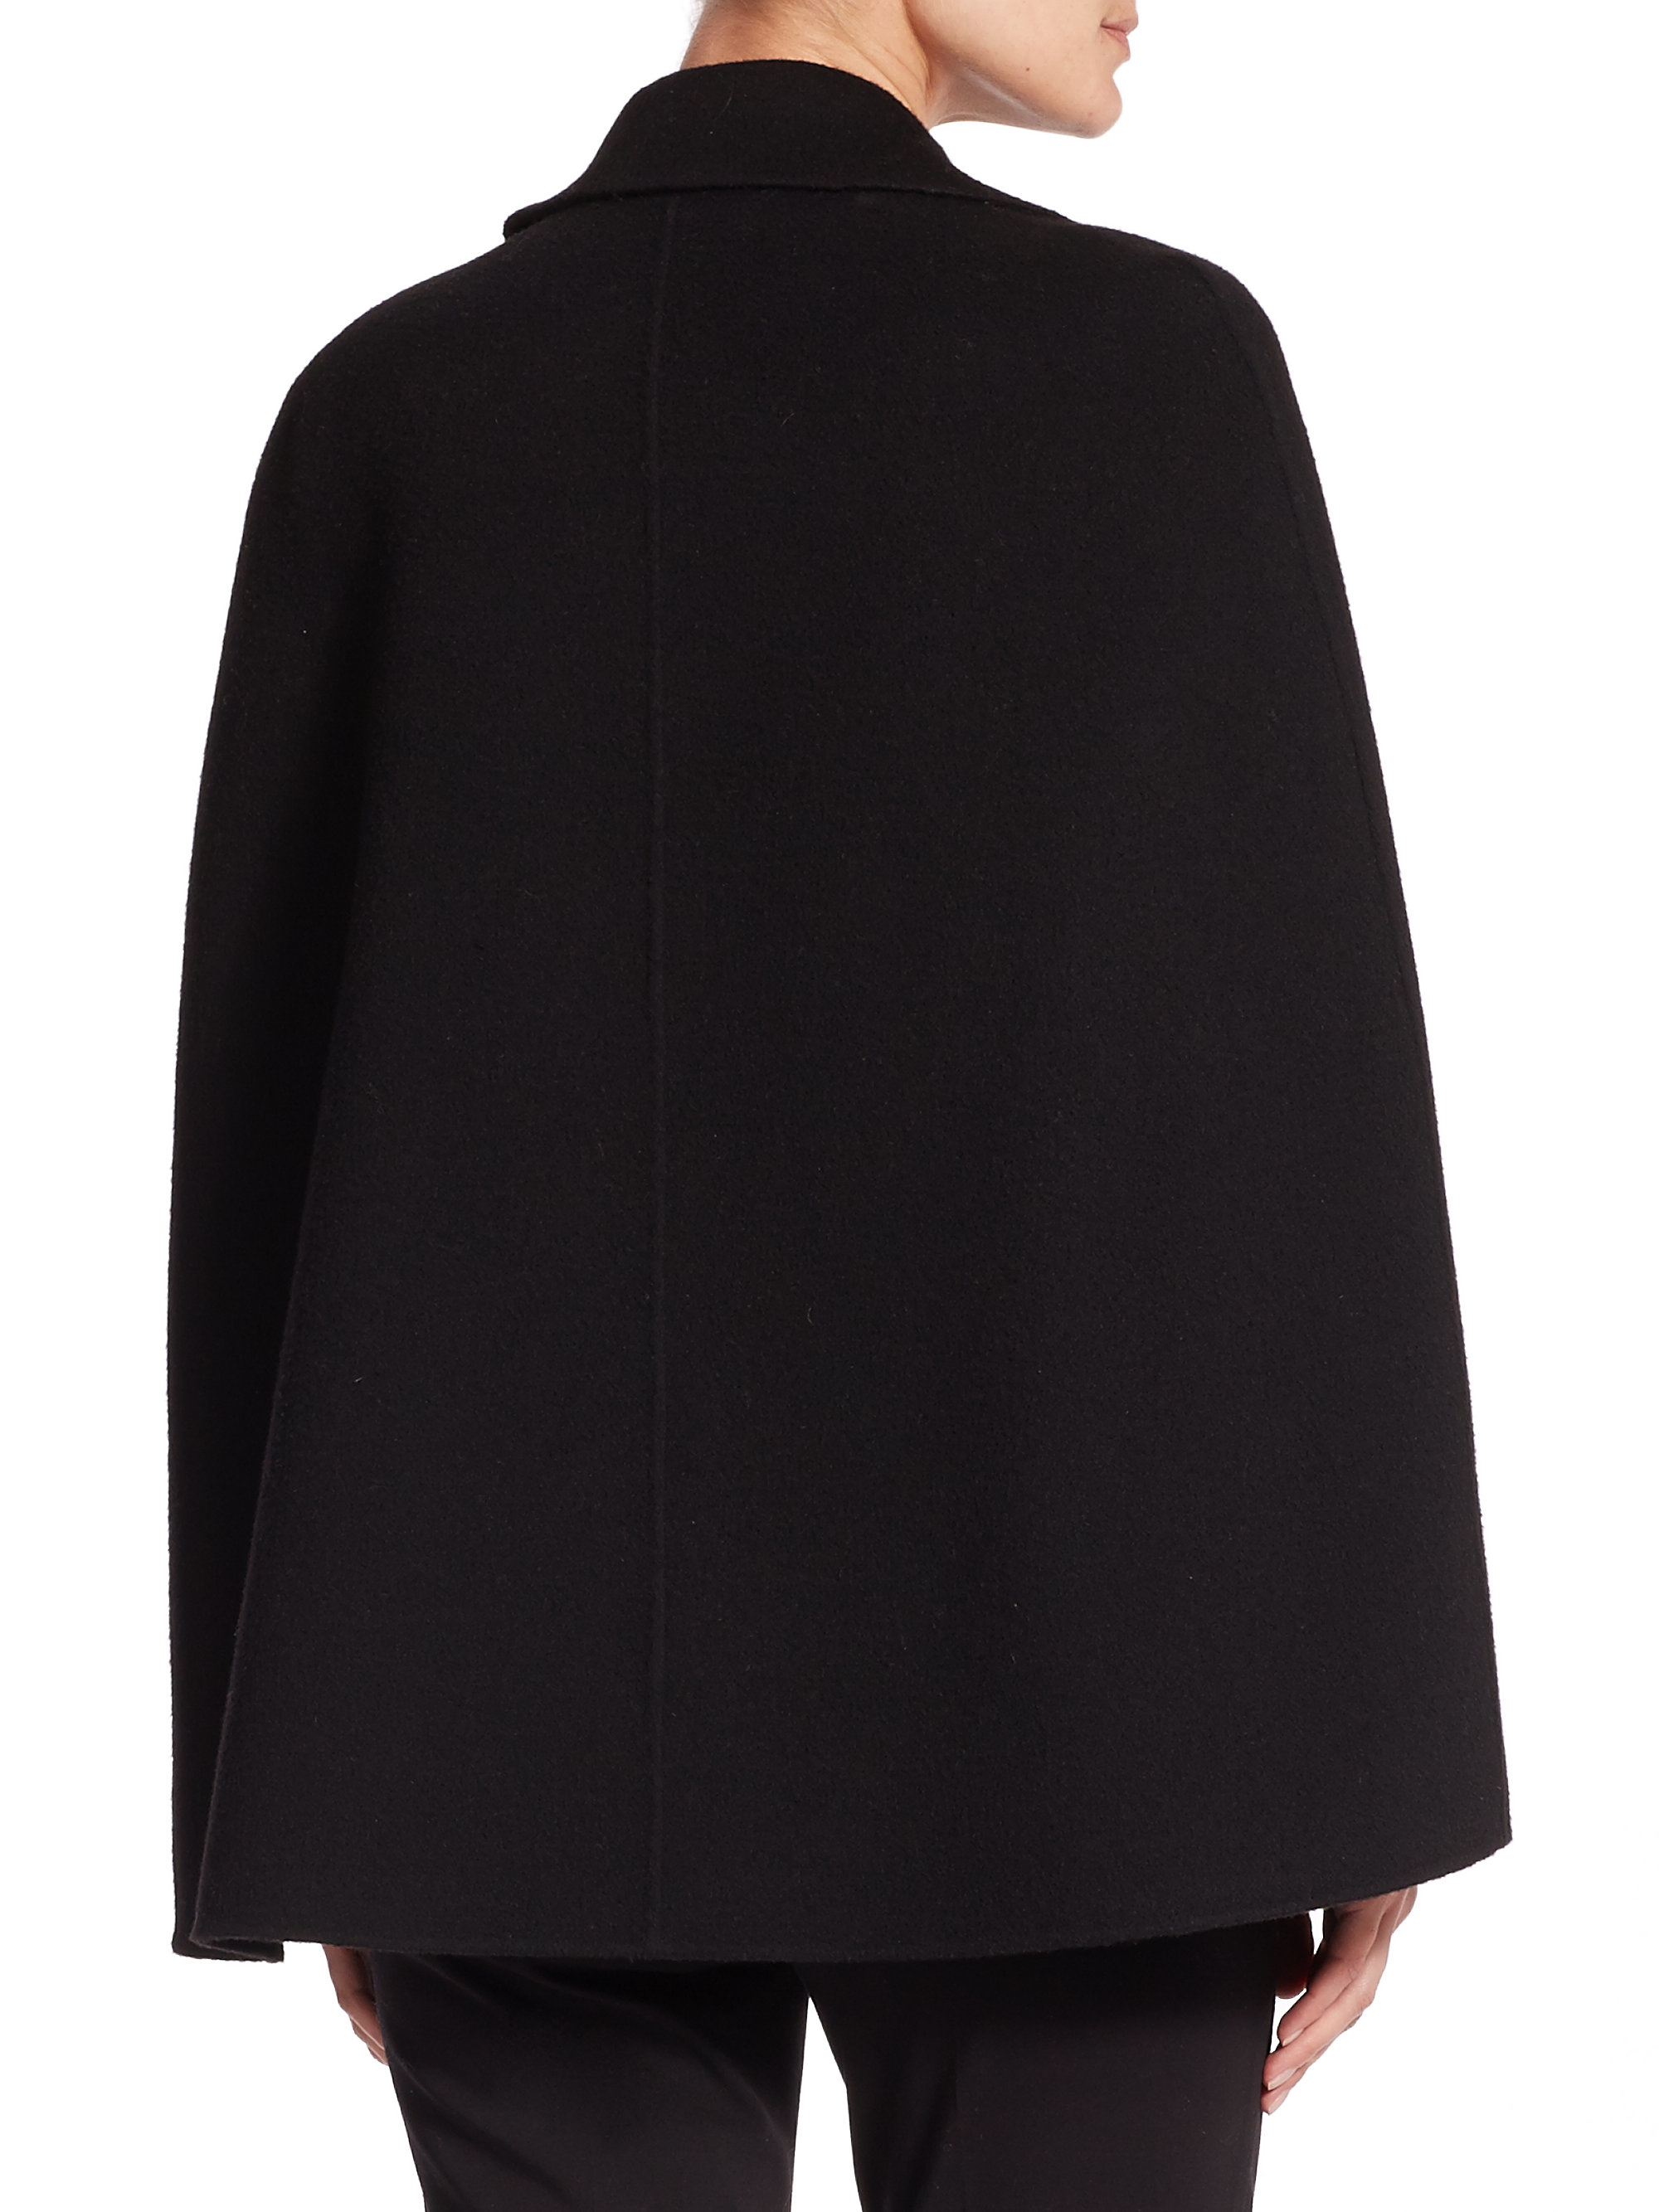 Lyst - Theory Kapalin Double-face Wool/cashmere Cape in Black